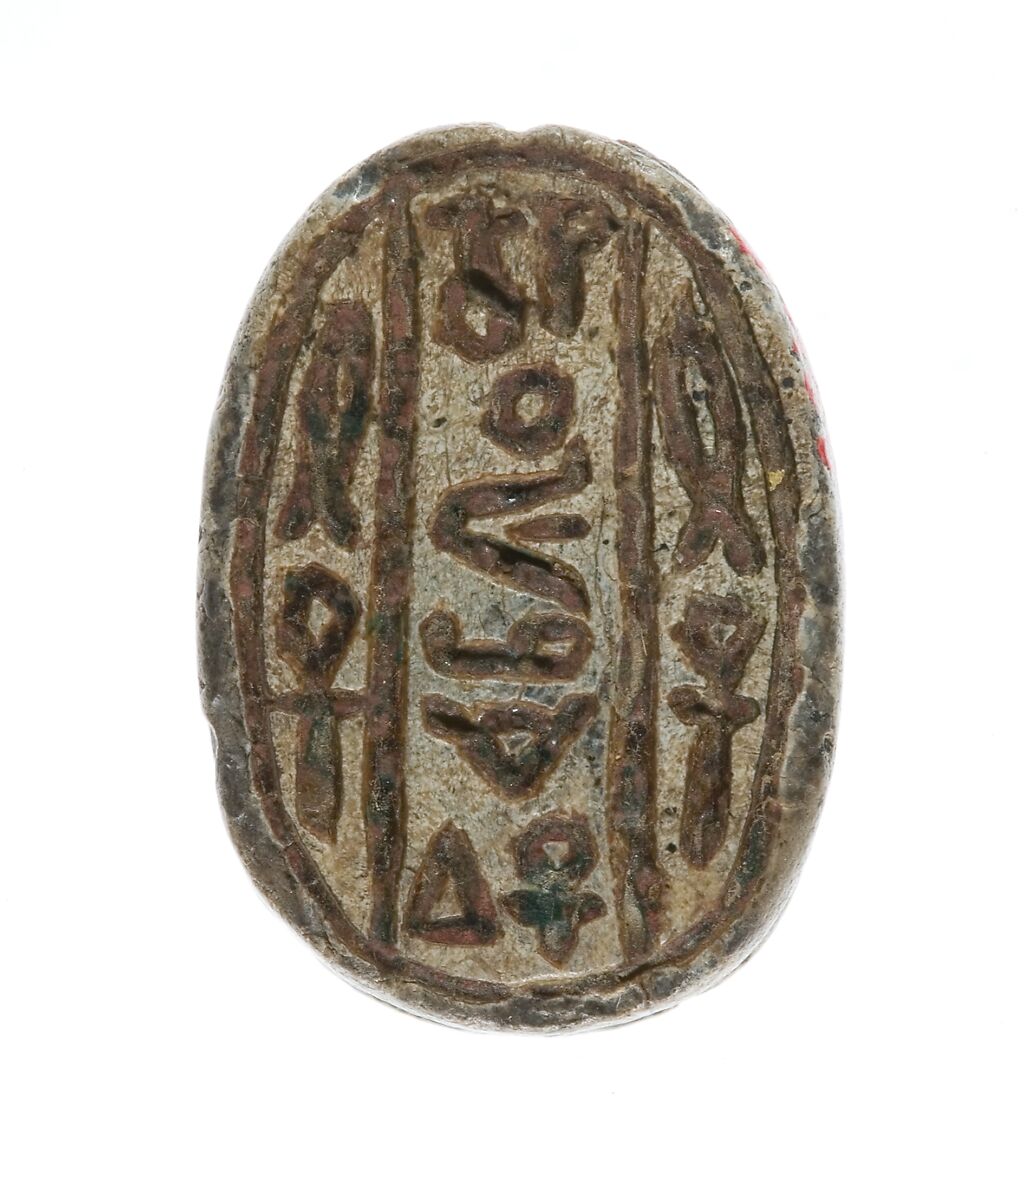 Scarab with the Name of the Hyksos King Sheshi, Glazed steatite 